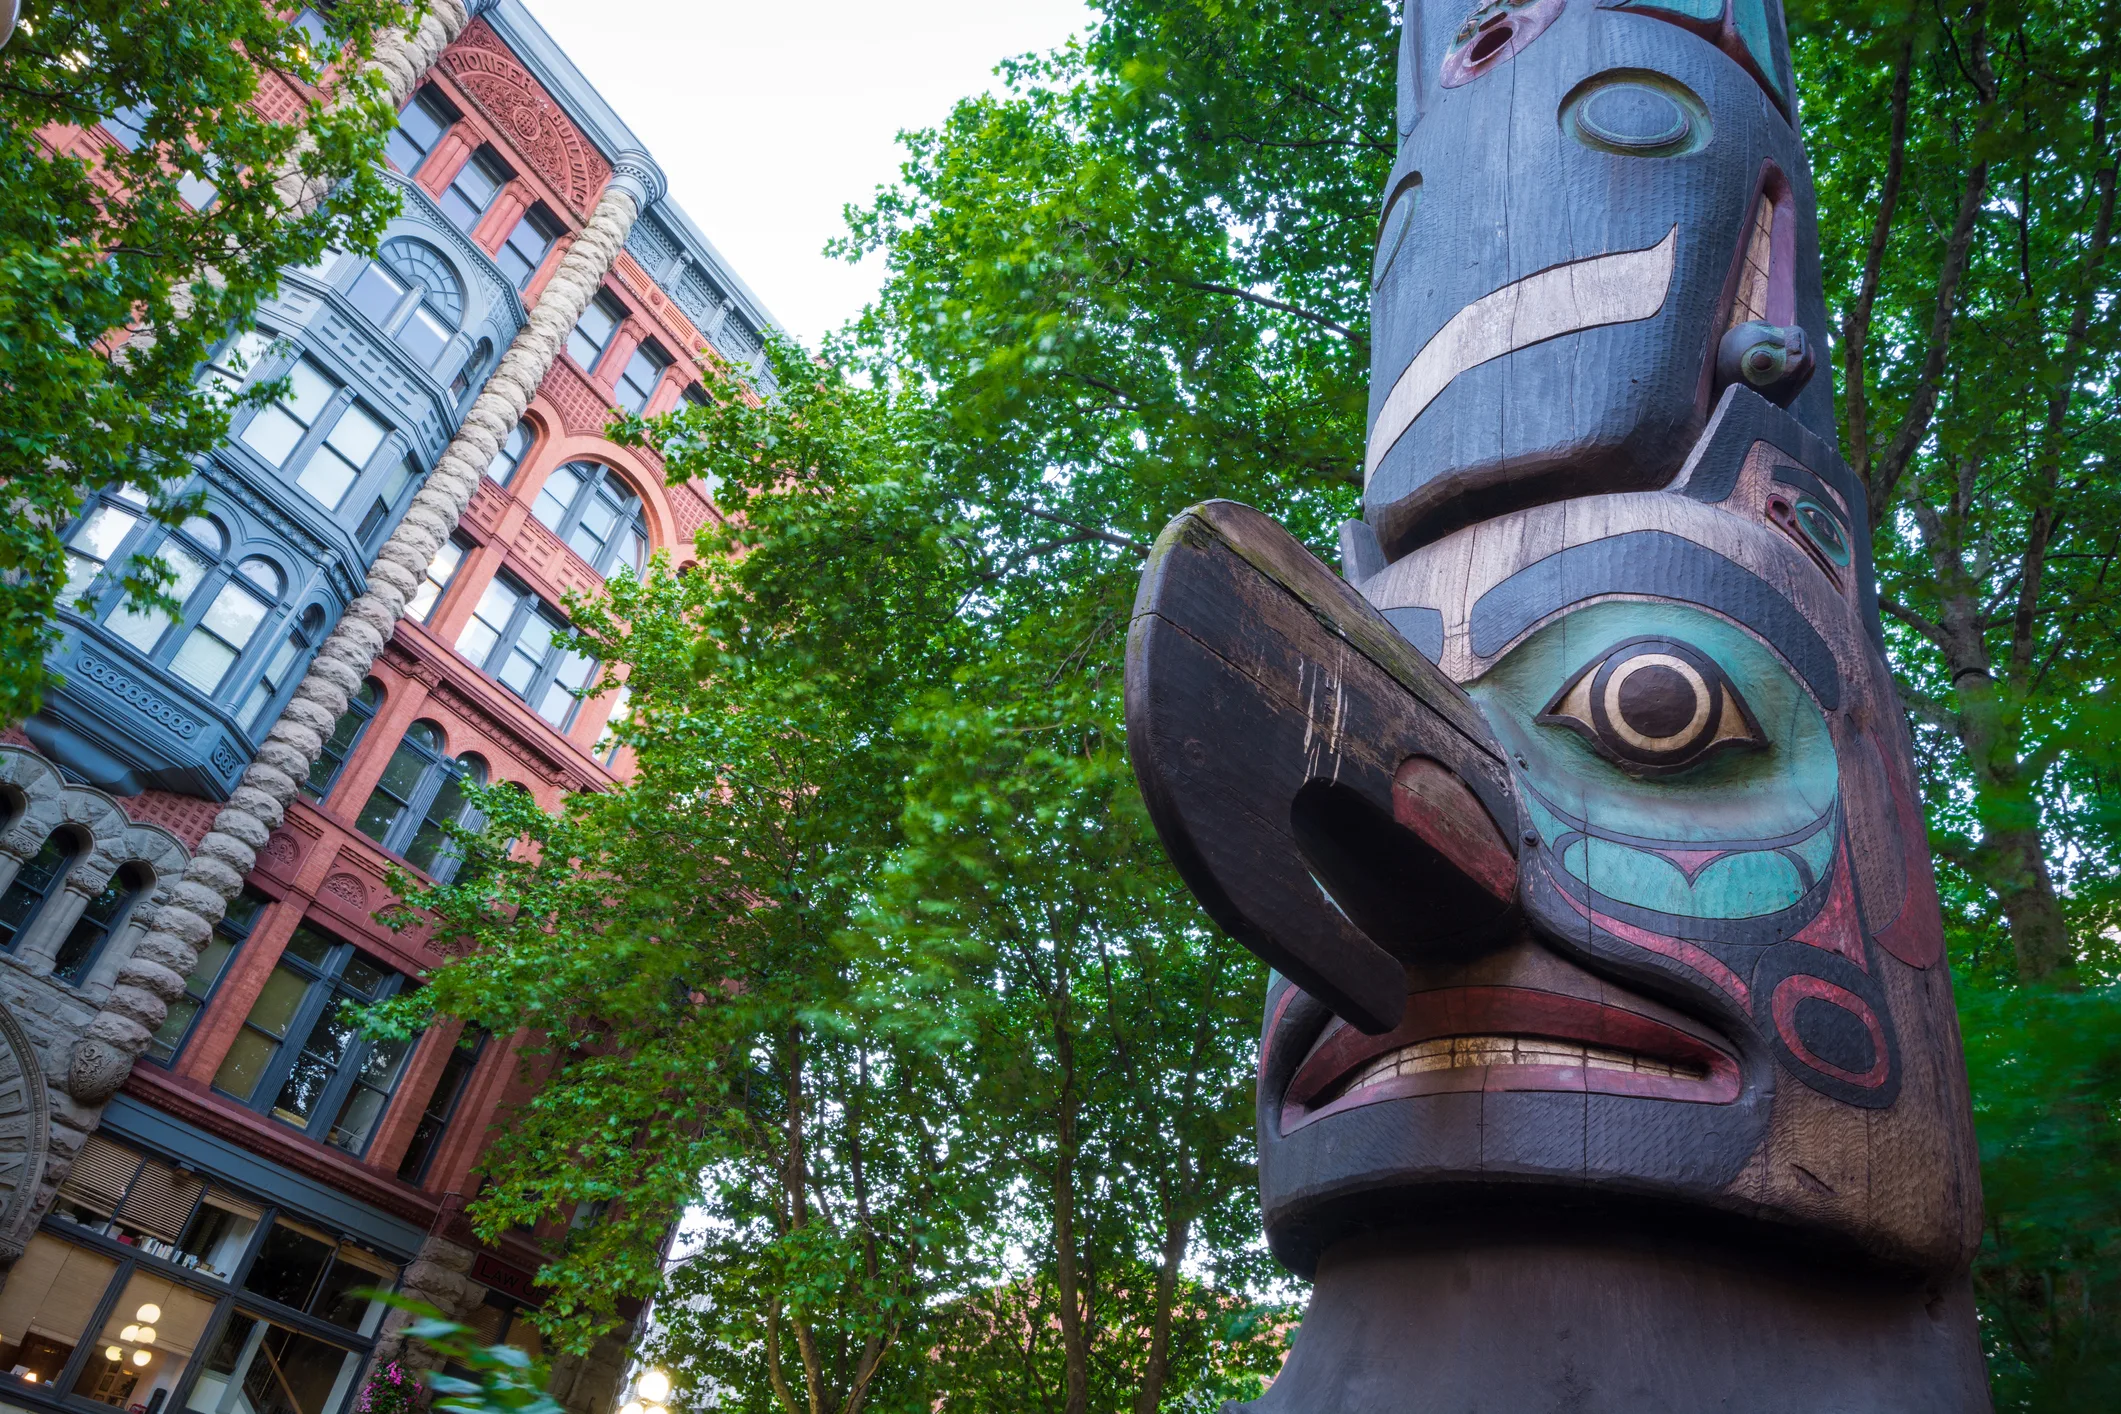 Totem pole at Pioneer Square in Seattle, WA with the Pioneer Building in the background, which was originally constructed in 1892.